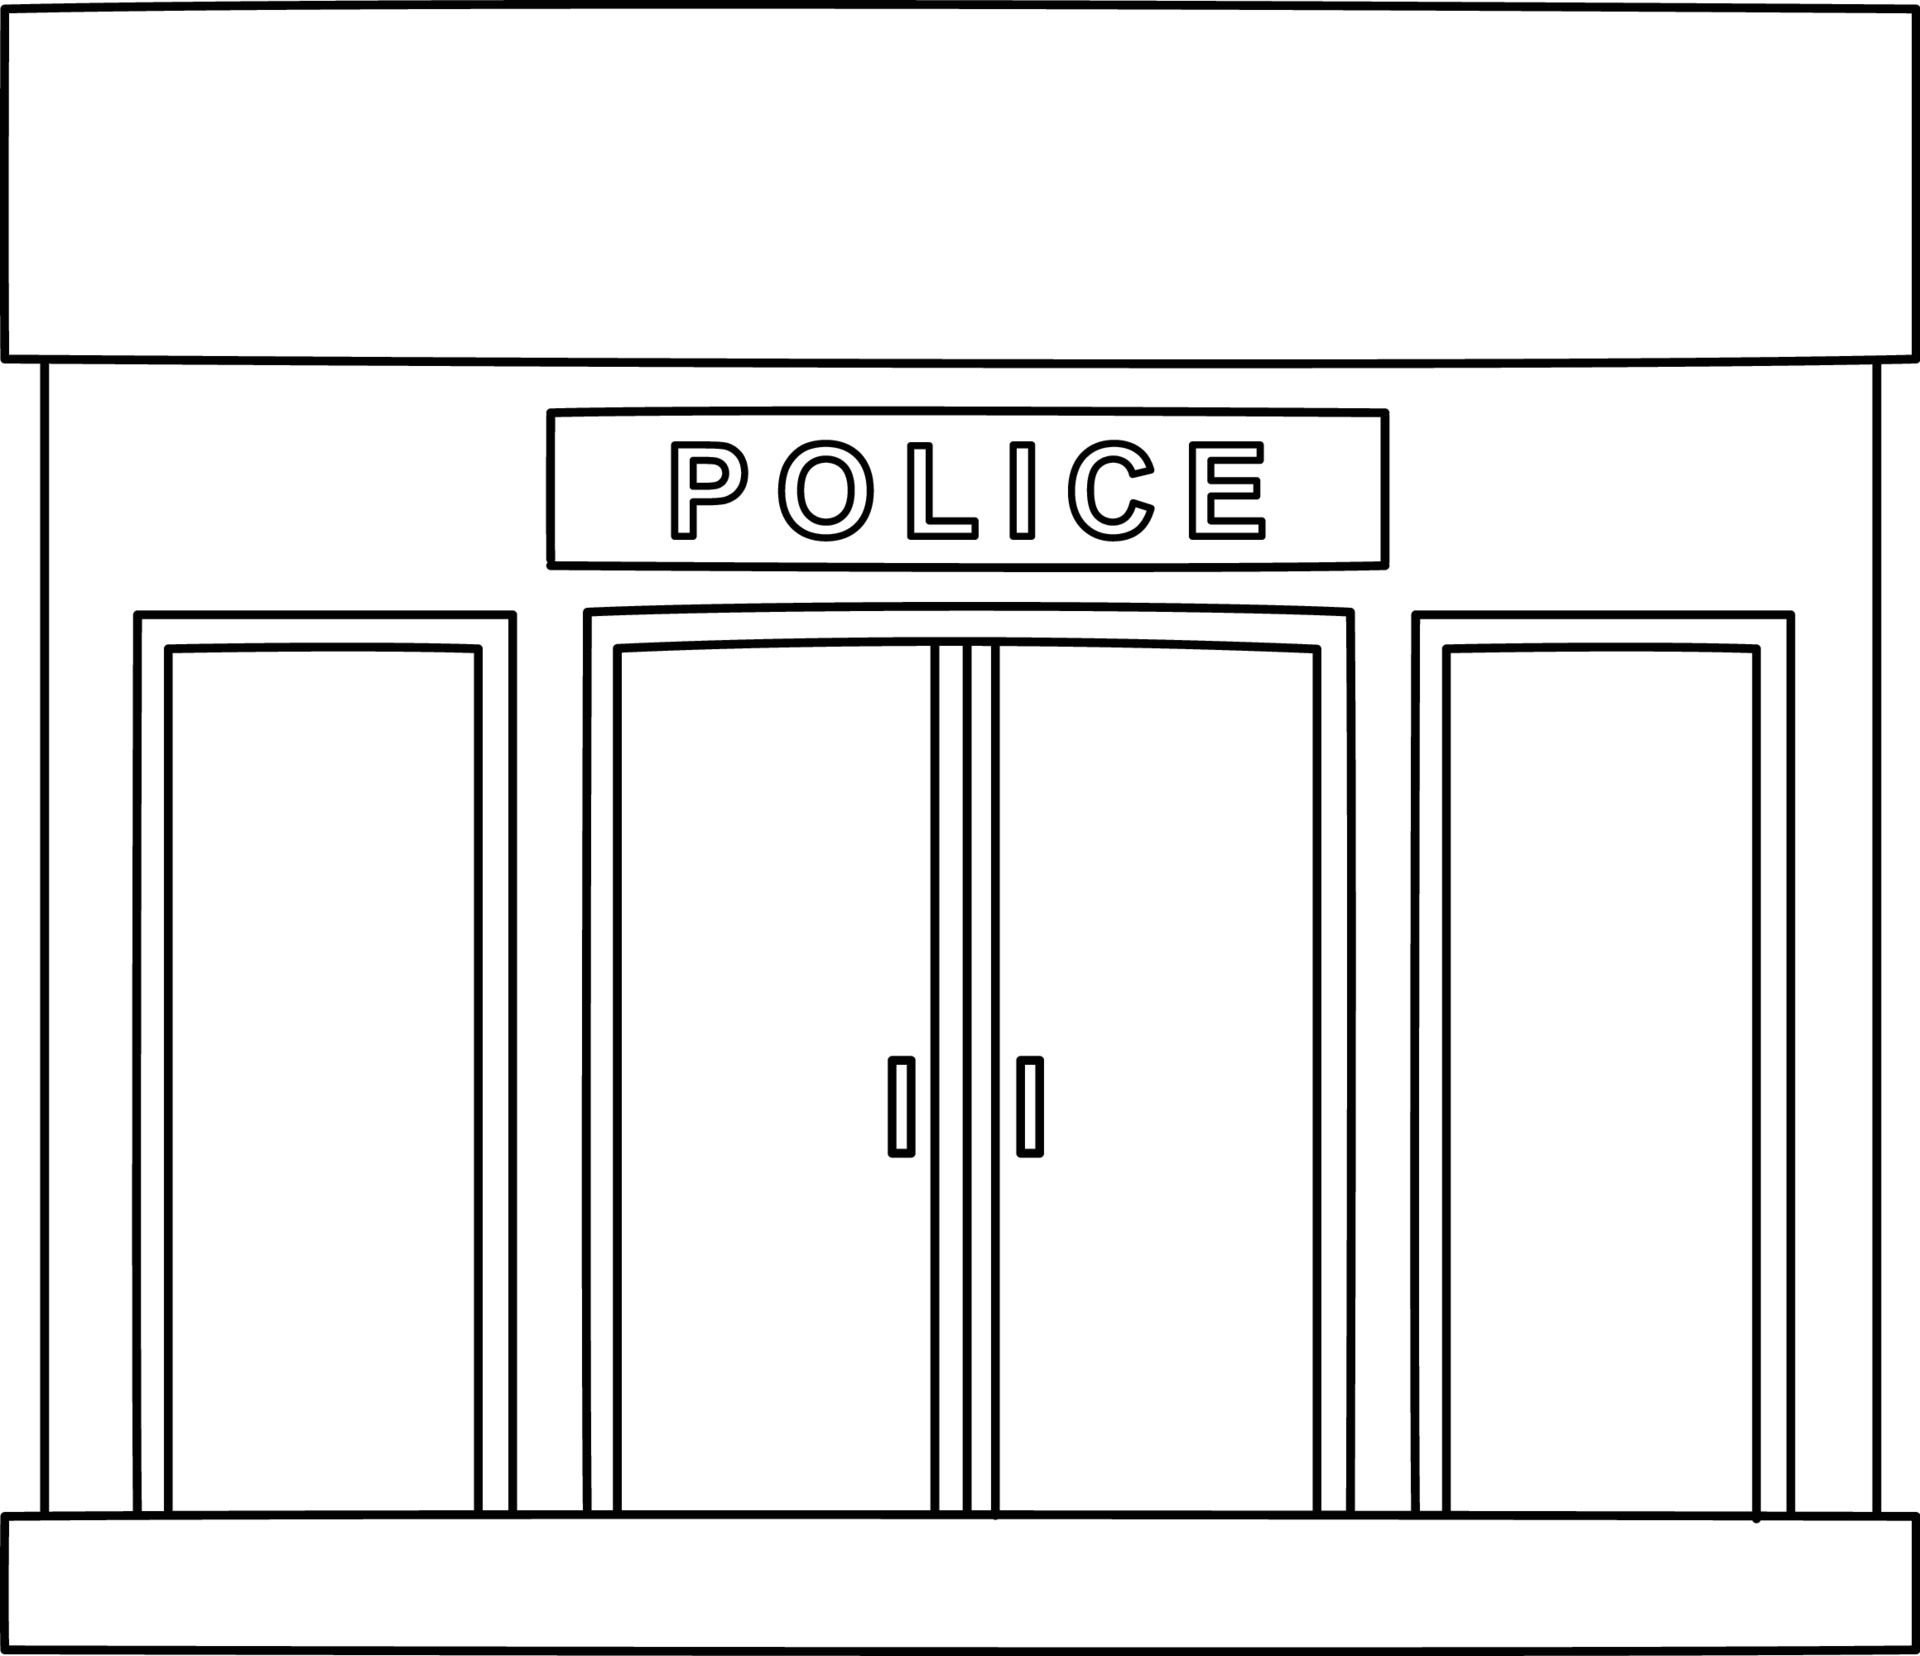 https://static.vecteezy.com/system/resources/previews/022/463/851/original/police-station-isolated-coloring-page-for-kids-free-vector.jpg